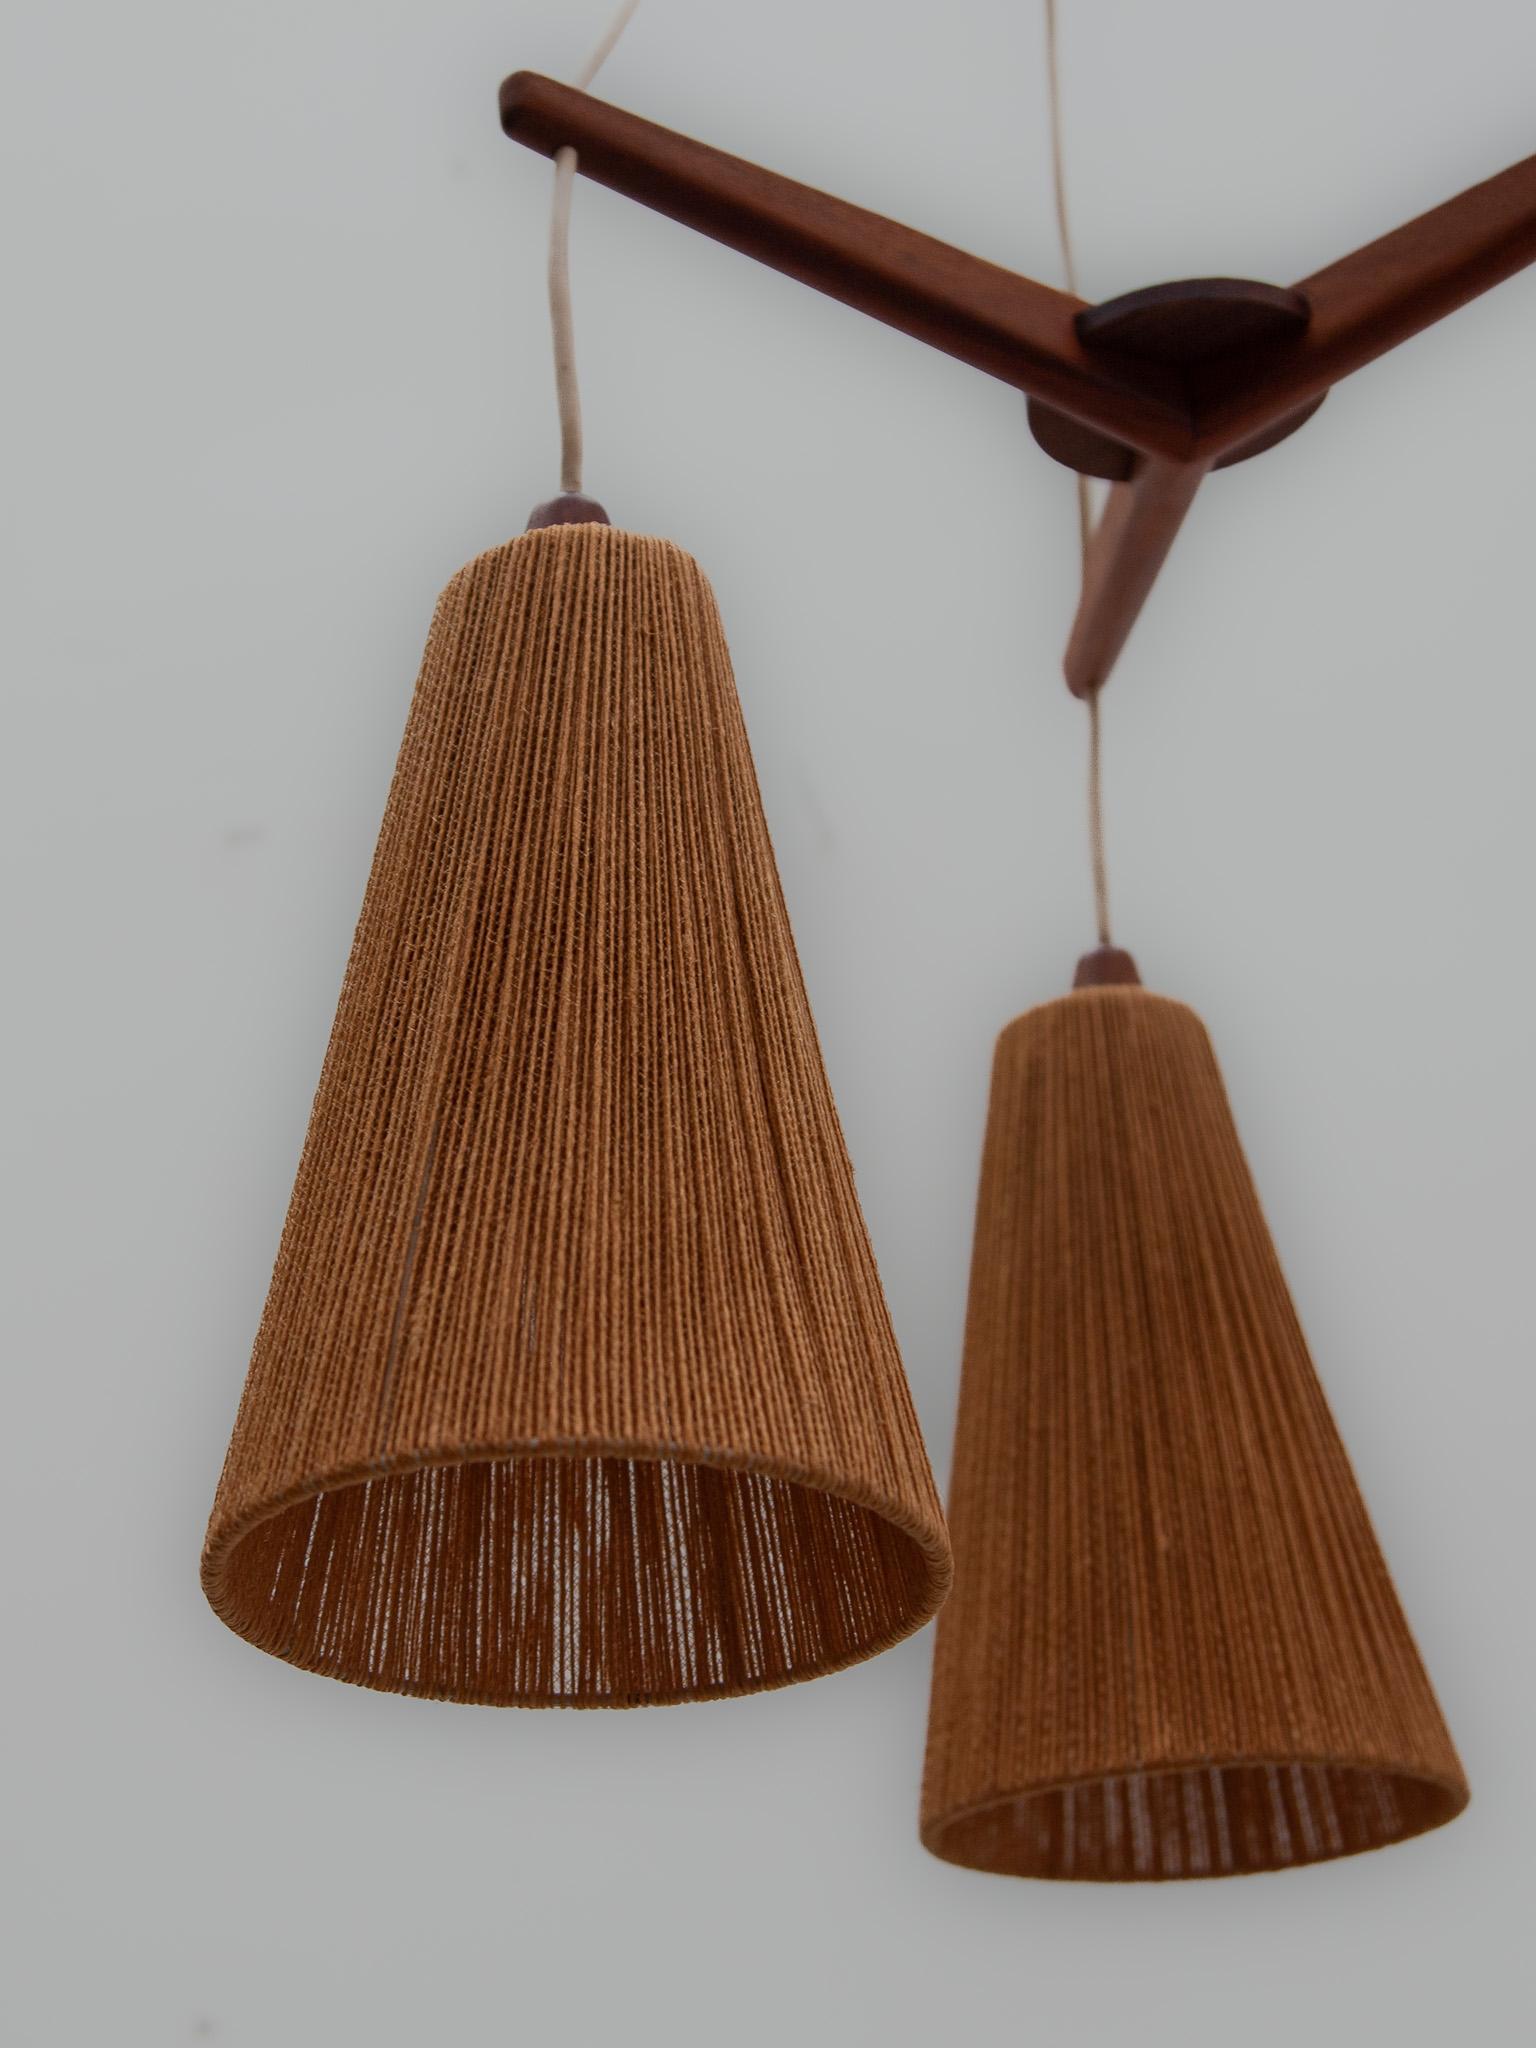 Teak and Jute Cord Pendant Cascade Lamp by Temde, Germany, 1960s For Sale 4